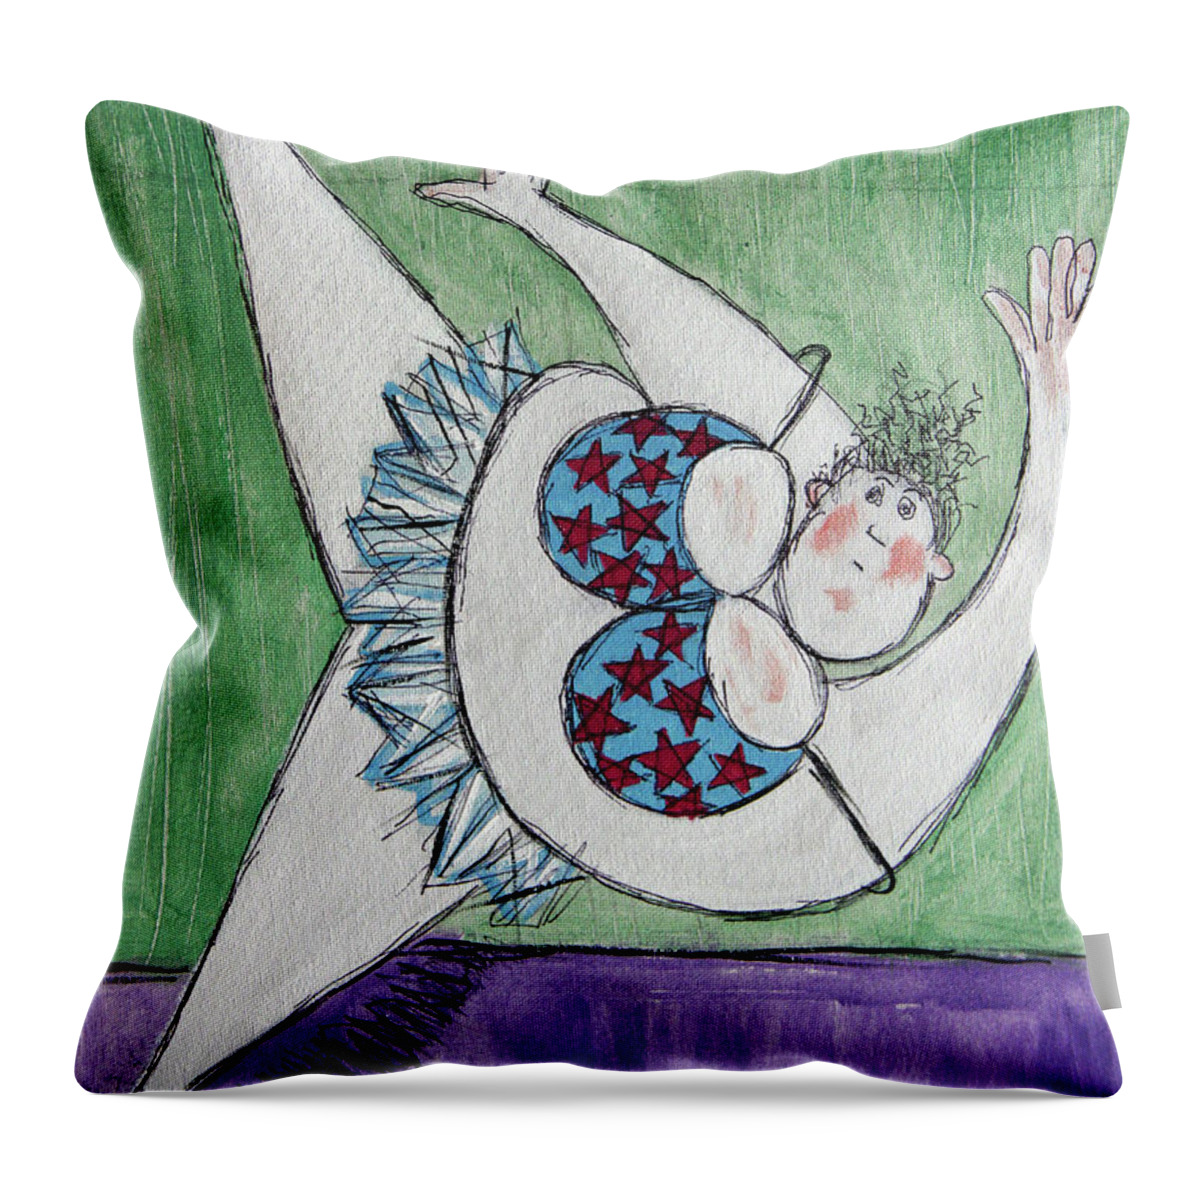 Whimsical Throw Pillow featuring the painting Retired Ballerina Stretching #2 by Anthony Falbo